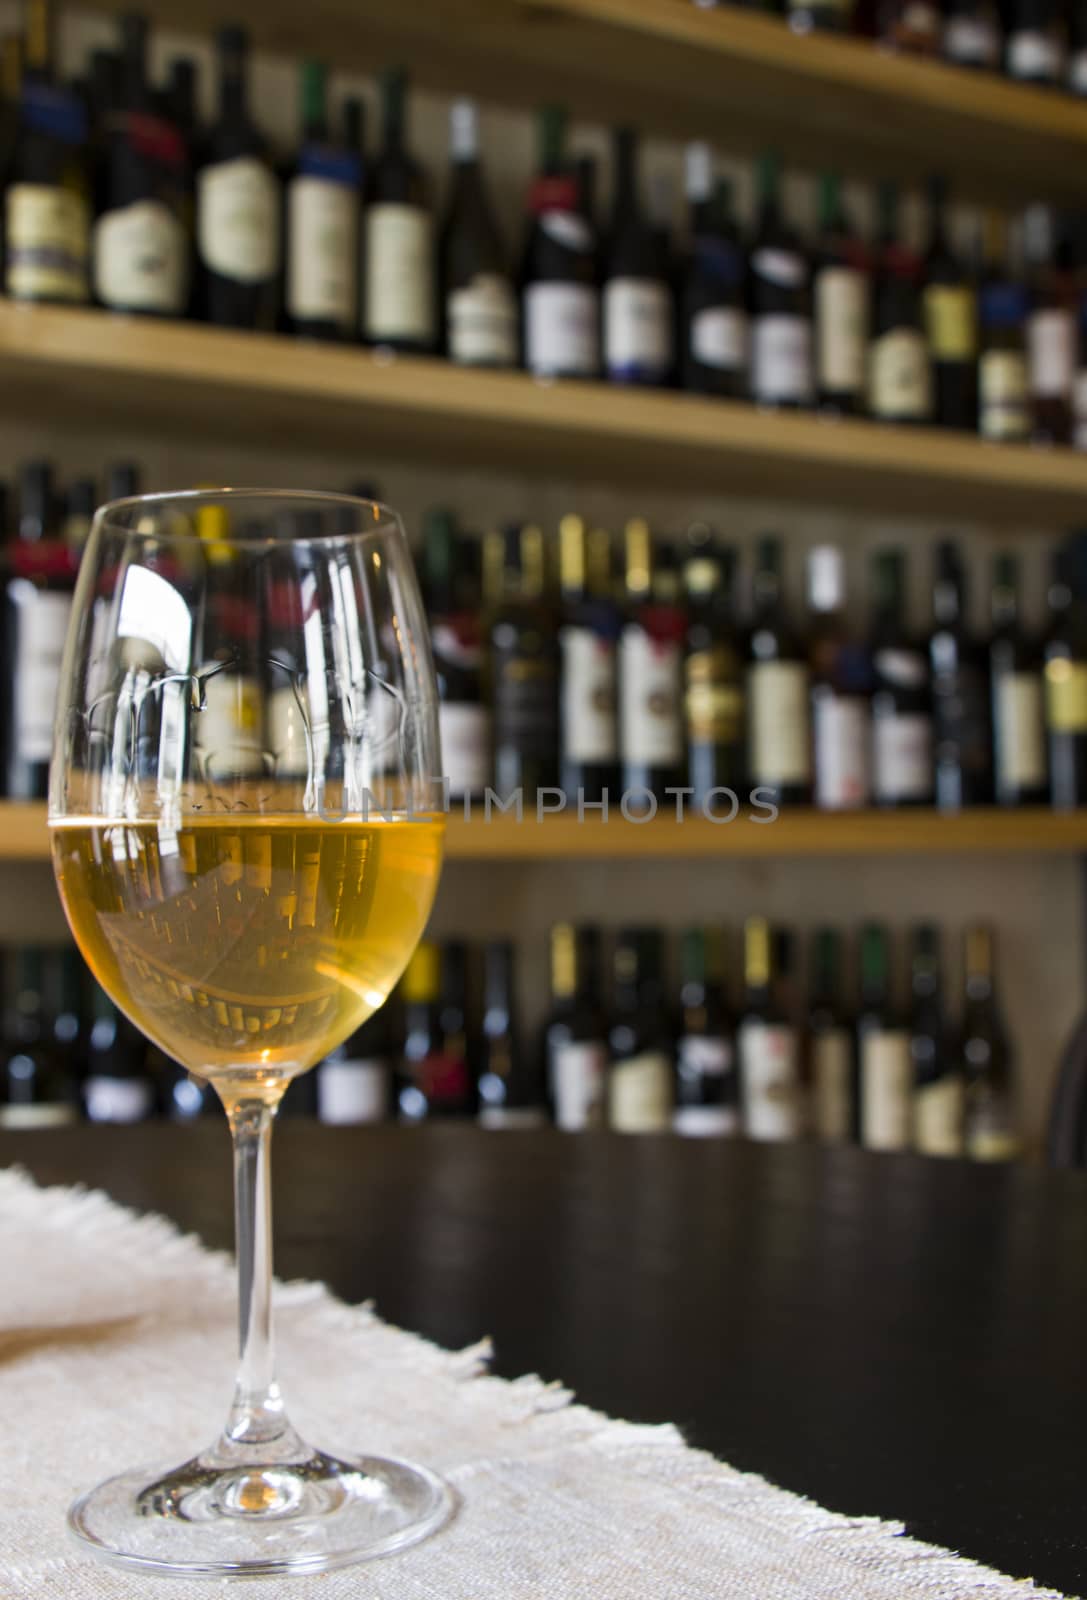 Full white wine glass on the table, wine bottle background, wine magazine and shop in restaurant and bar. by Taidundua